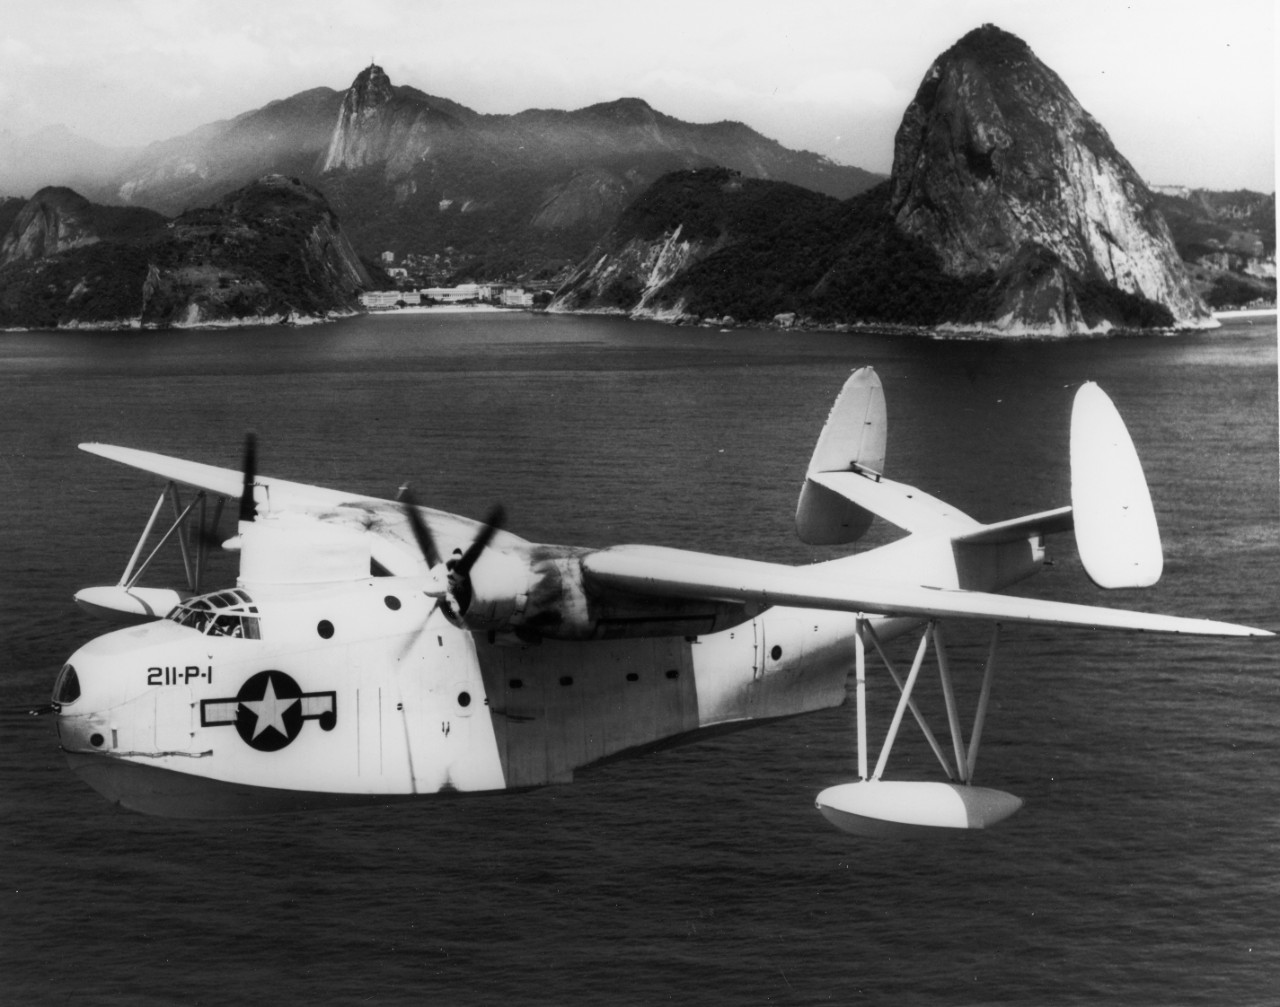 Martin PBM-3 Mariner Patrol Bomber in flight over Rio de Janeiro, Brazil, December 1943. Sugarloaf Mountain is in the background. Plane appears to be from VP-211. NARA photo number 80-G-56973.